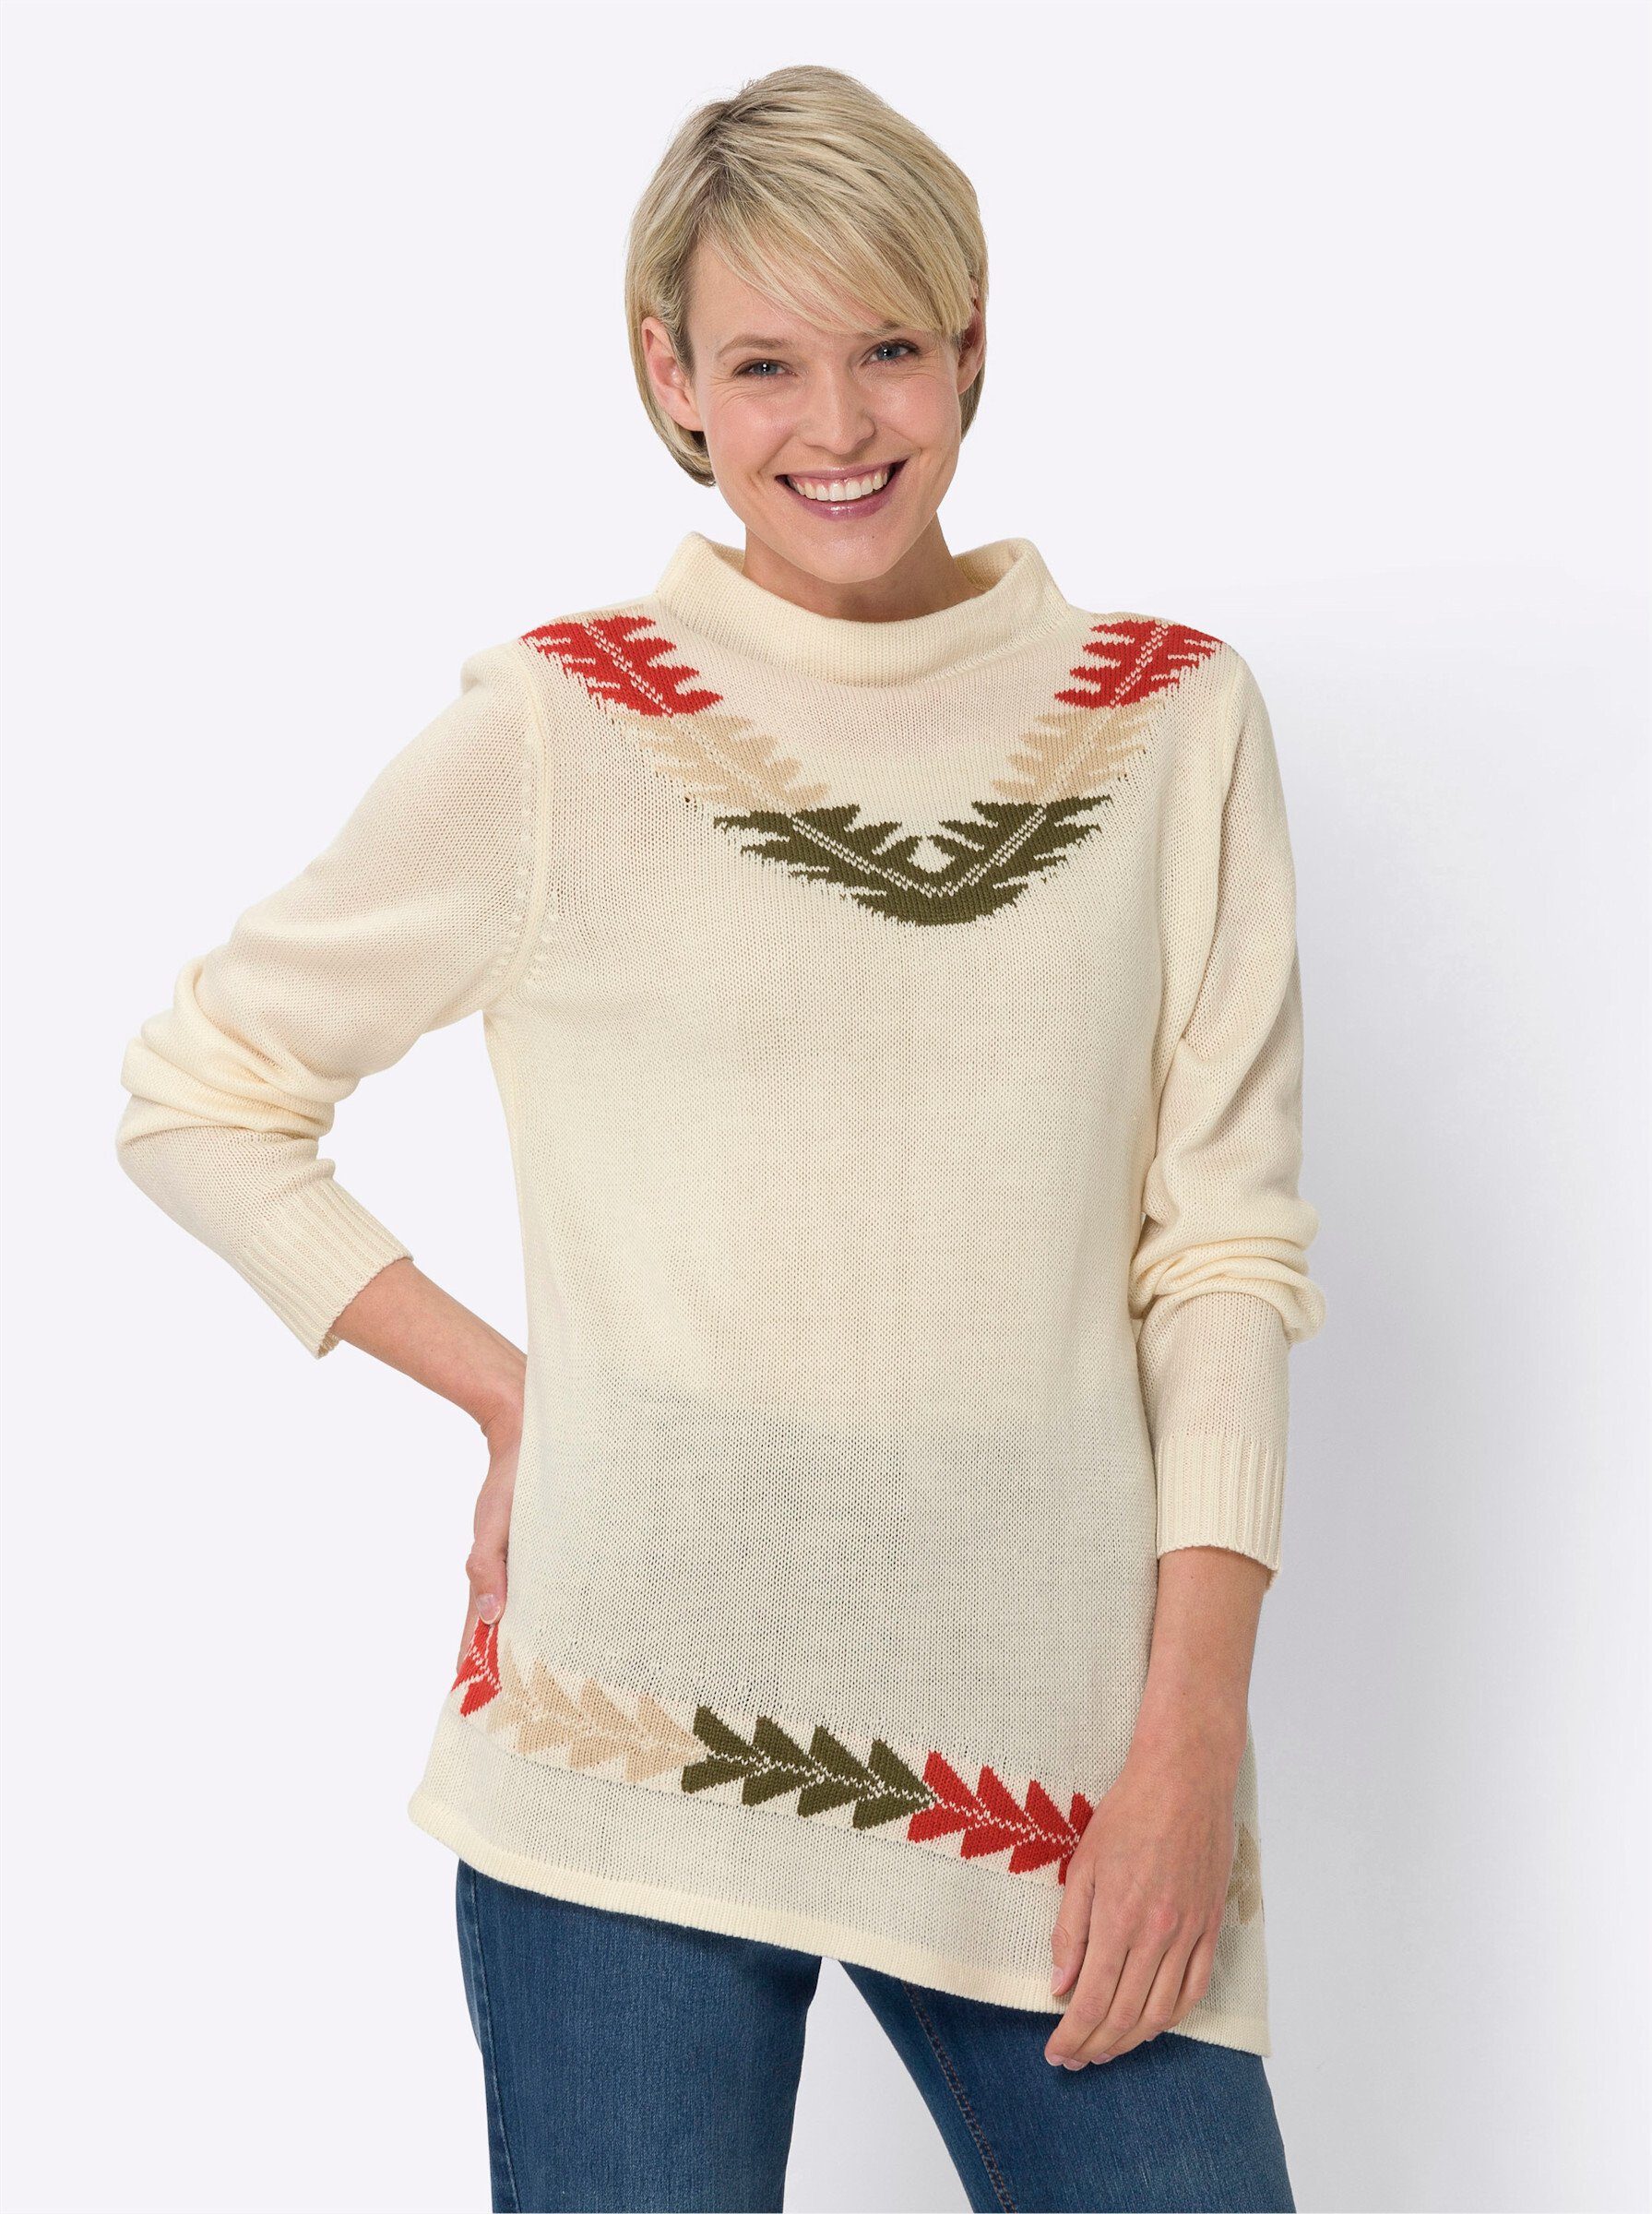 champagner-oliv Sieh Strickpullover an!